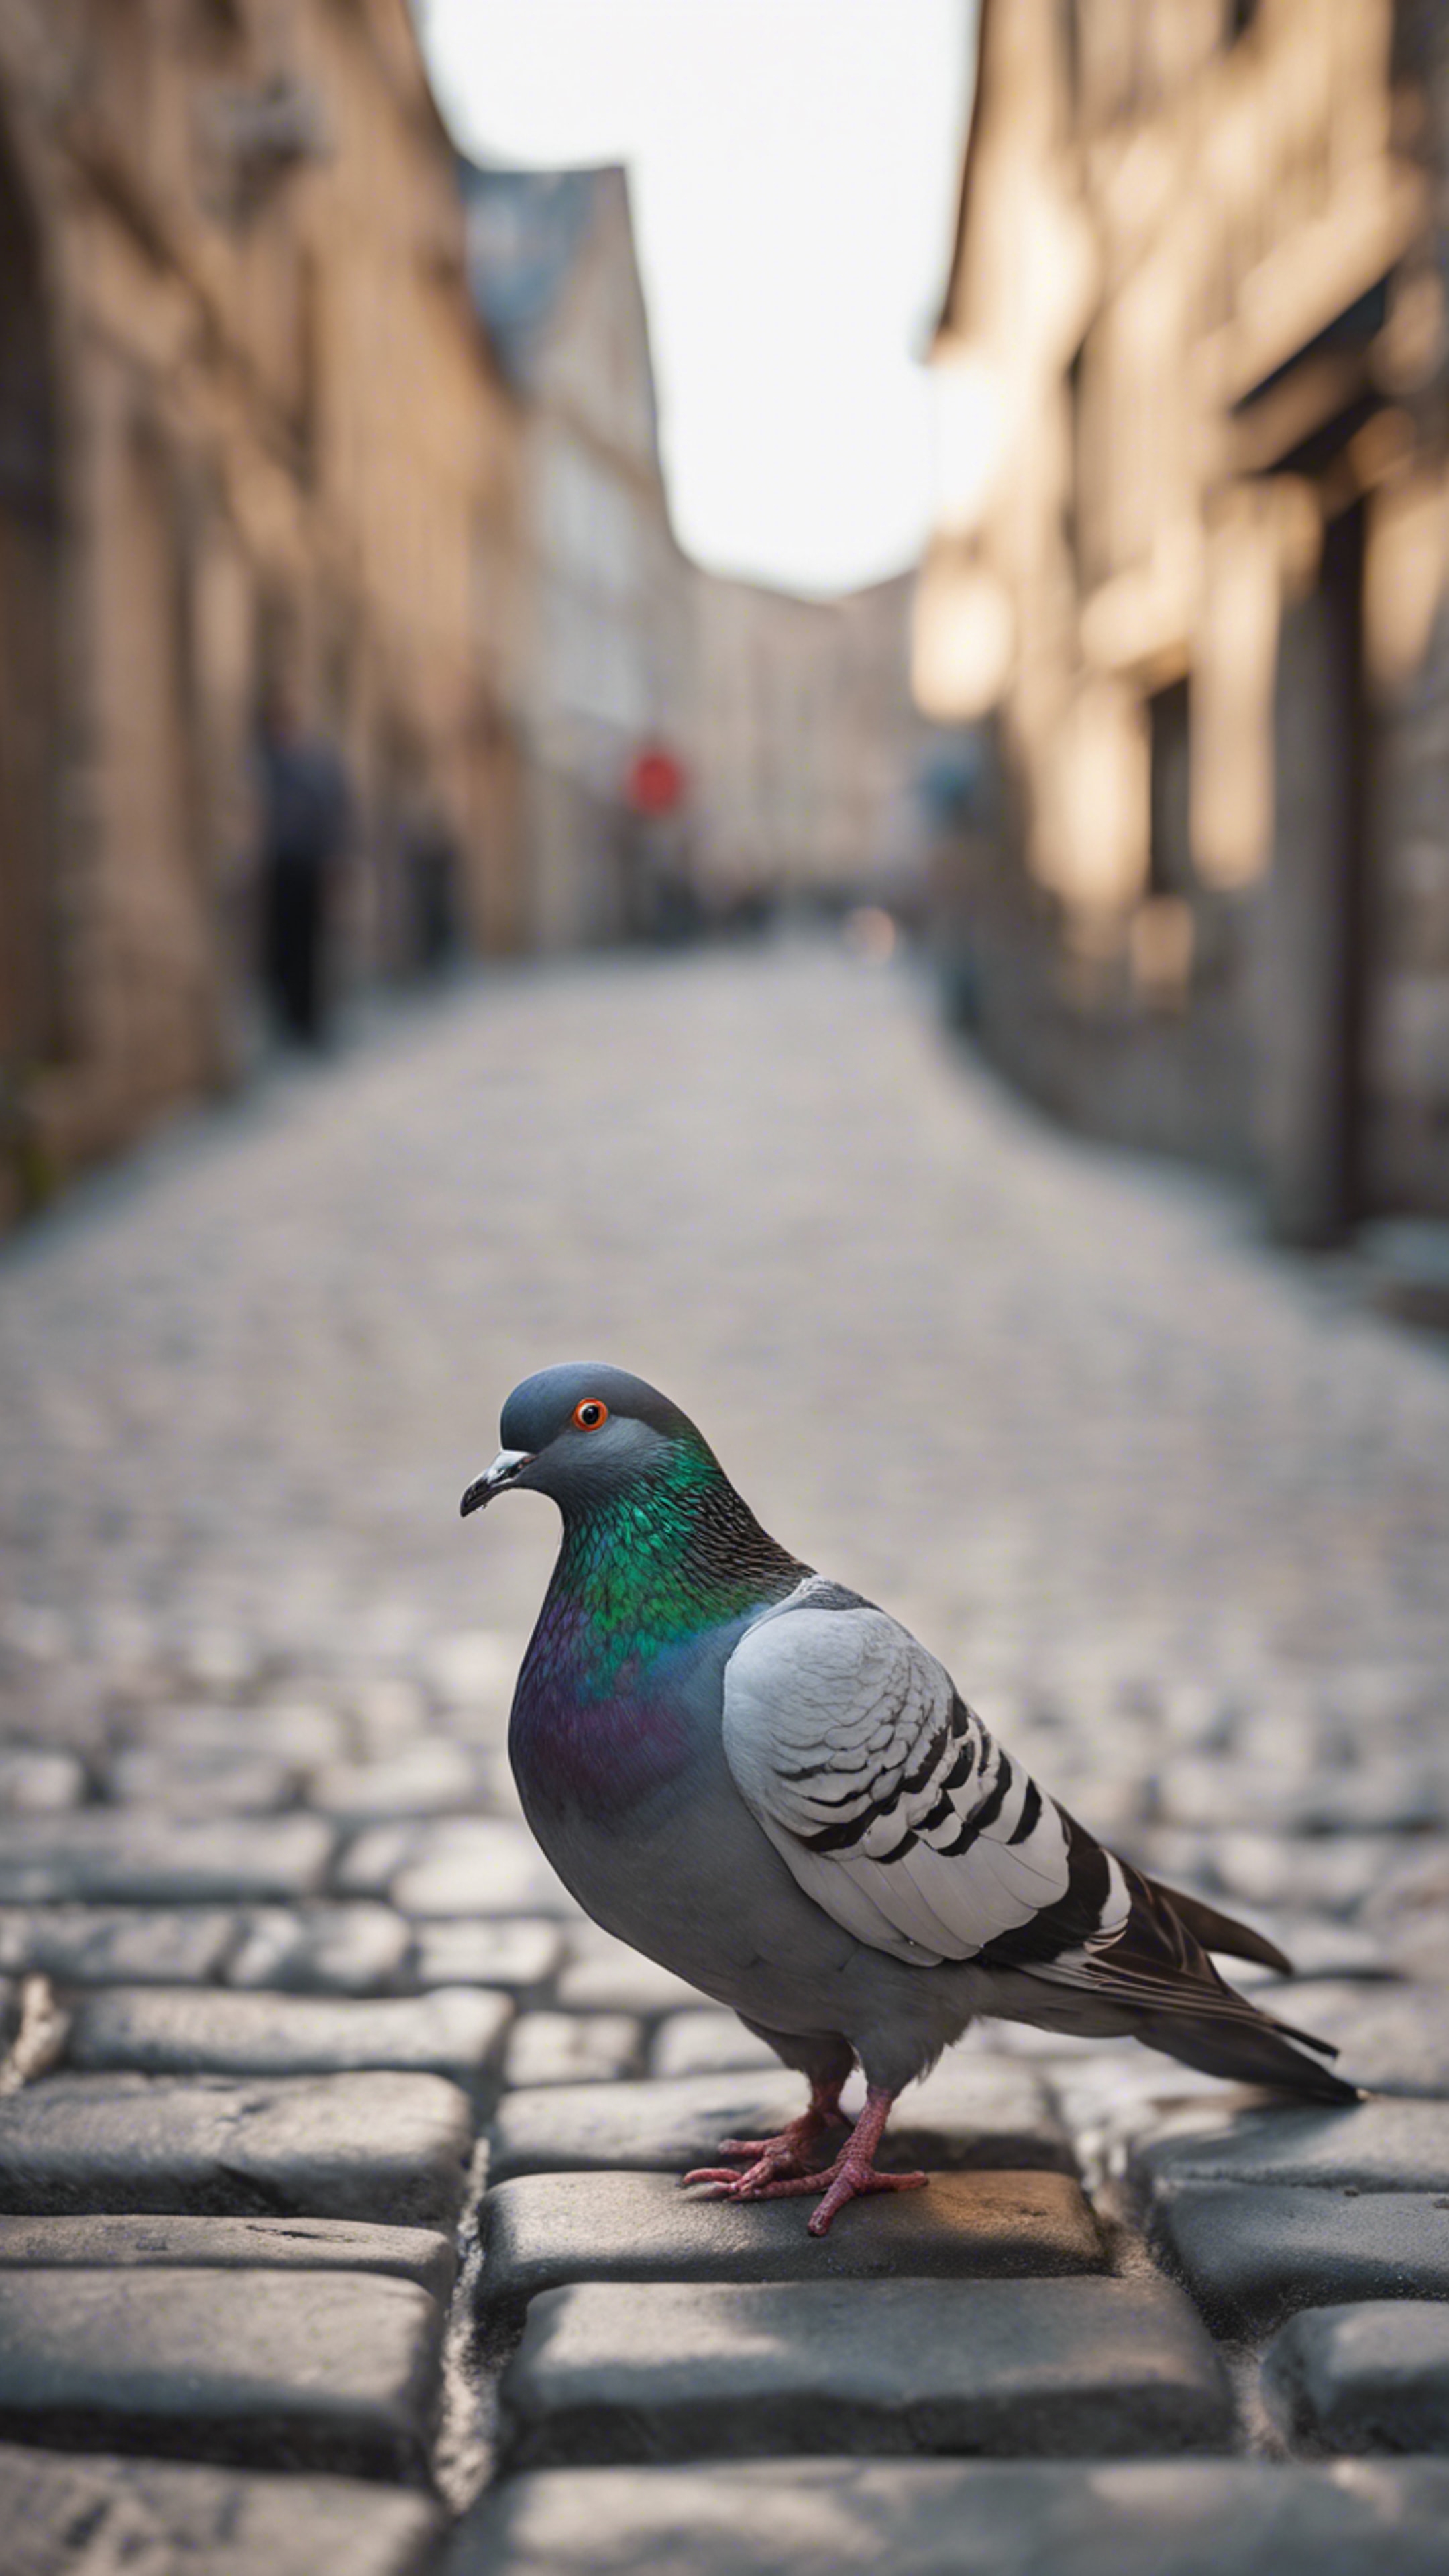 A pigeon standing on cobblestone street in the middle of an old city, its beautiful light gray plumage glistening. Papel de parede[03a93bb4226c4140ad33]